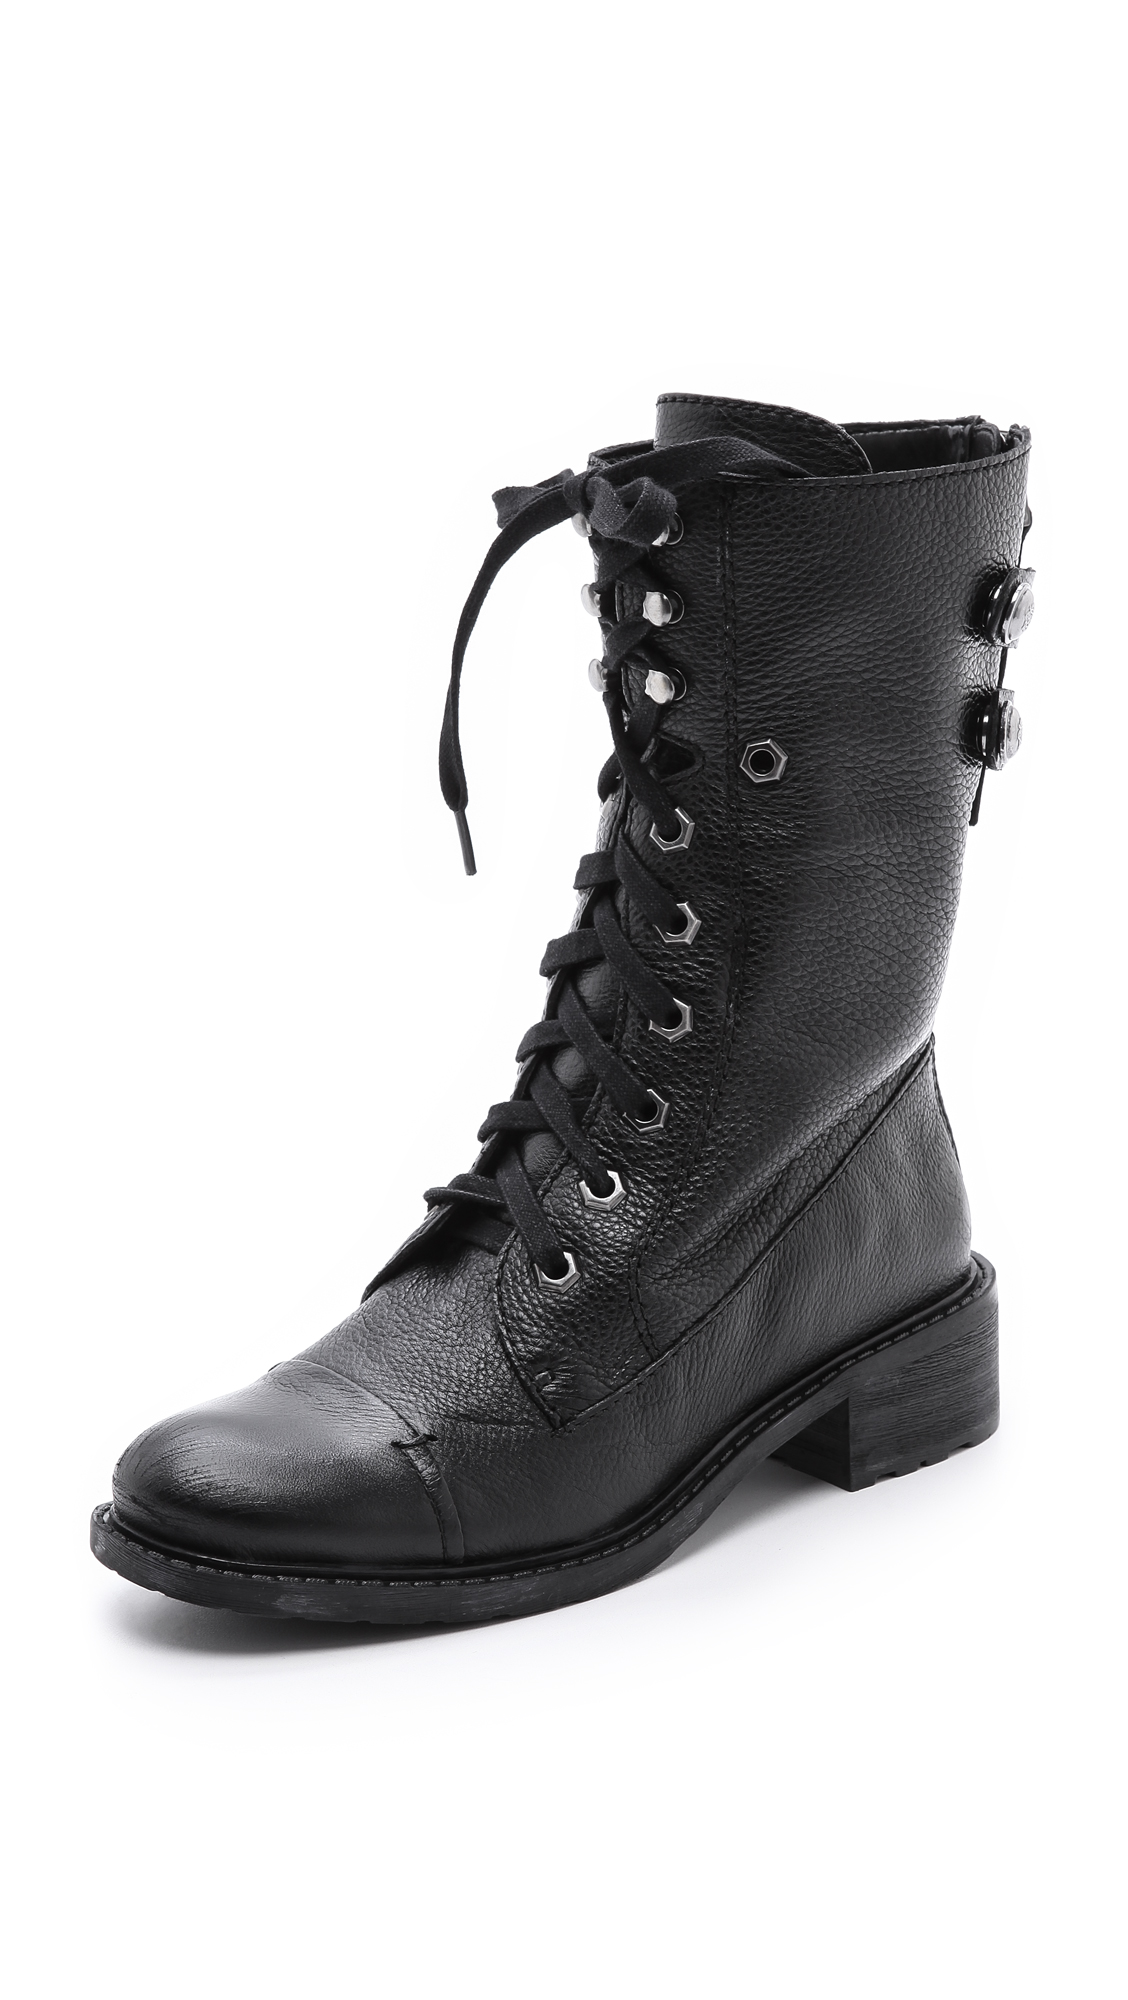 Lyst - Frye Melissa Tall Lace Up Boots - Black in Black